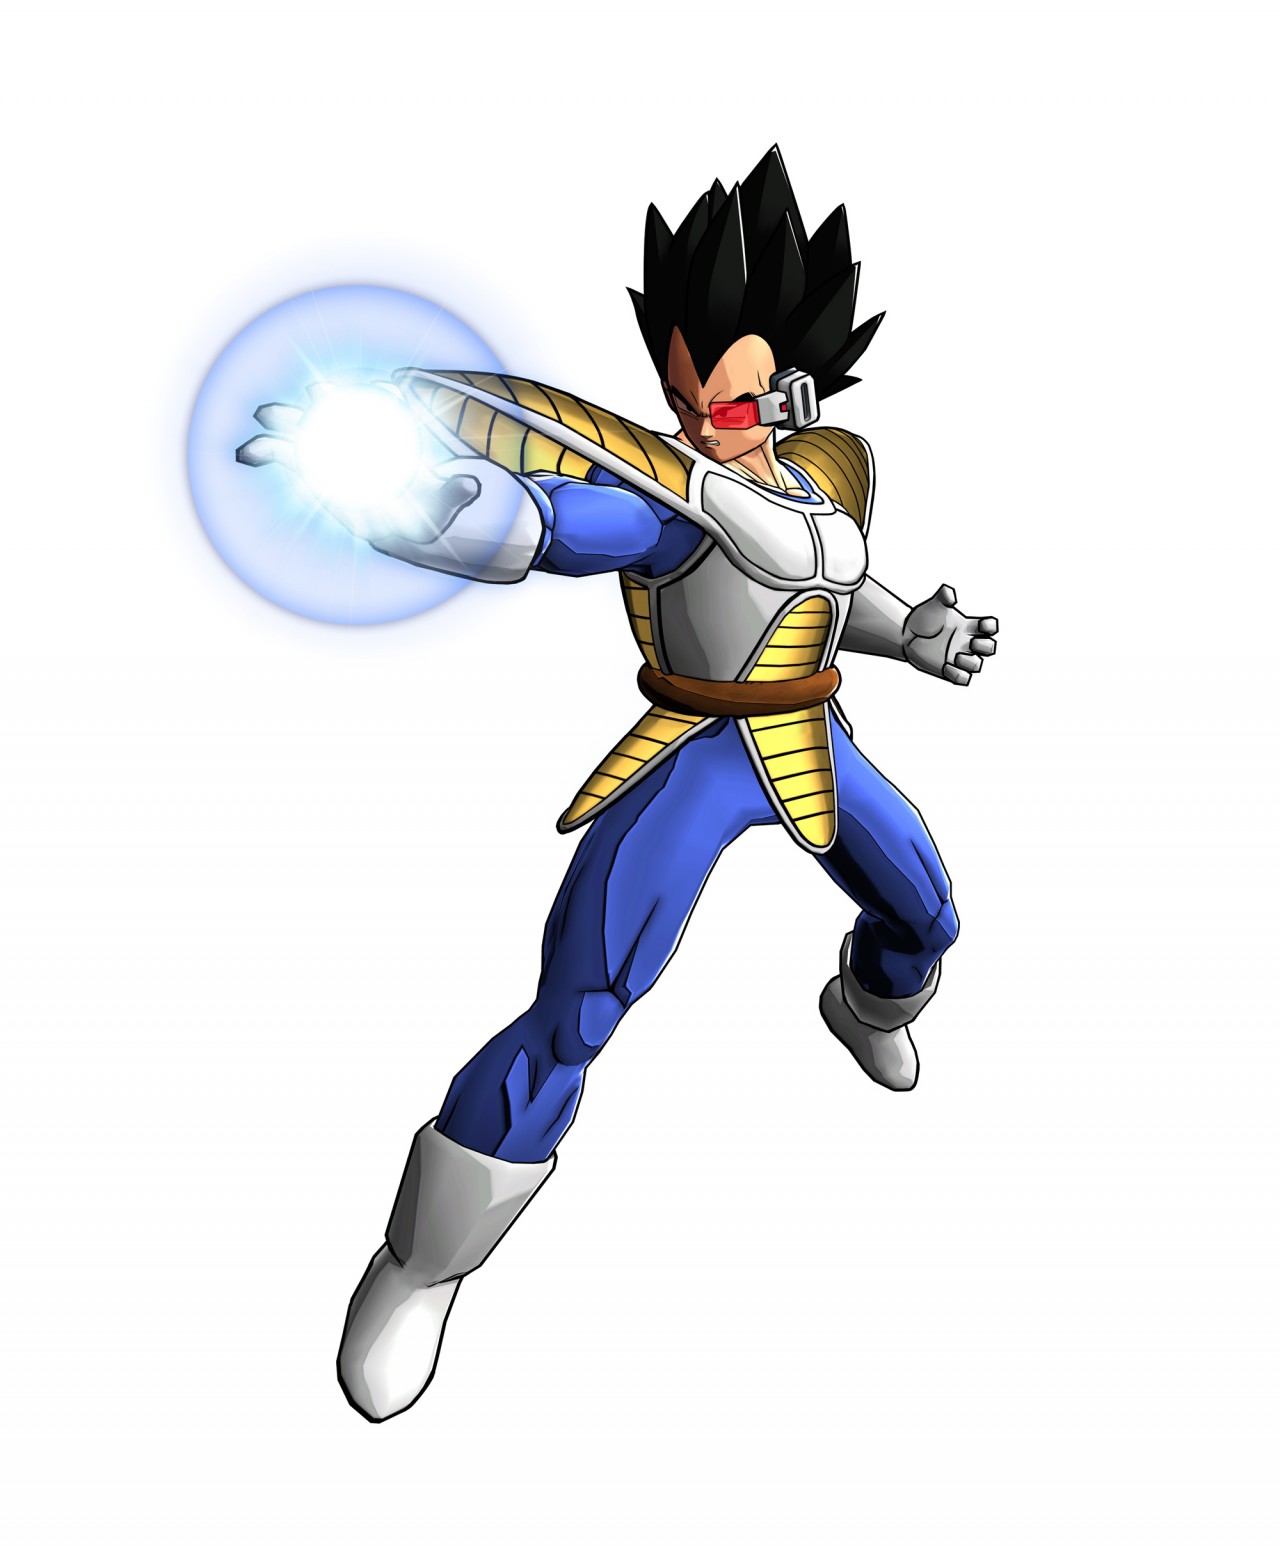 Dragon Ball Z: Battle of Z Screens - Blast from the Past ...